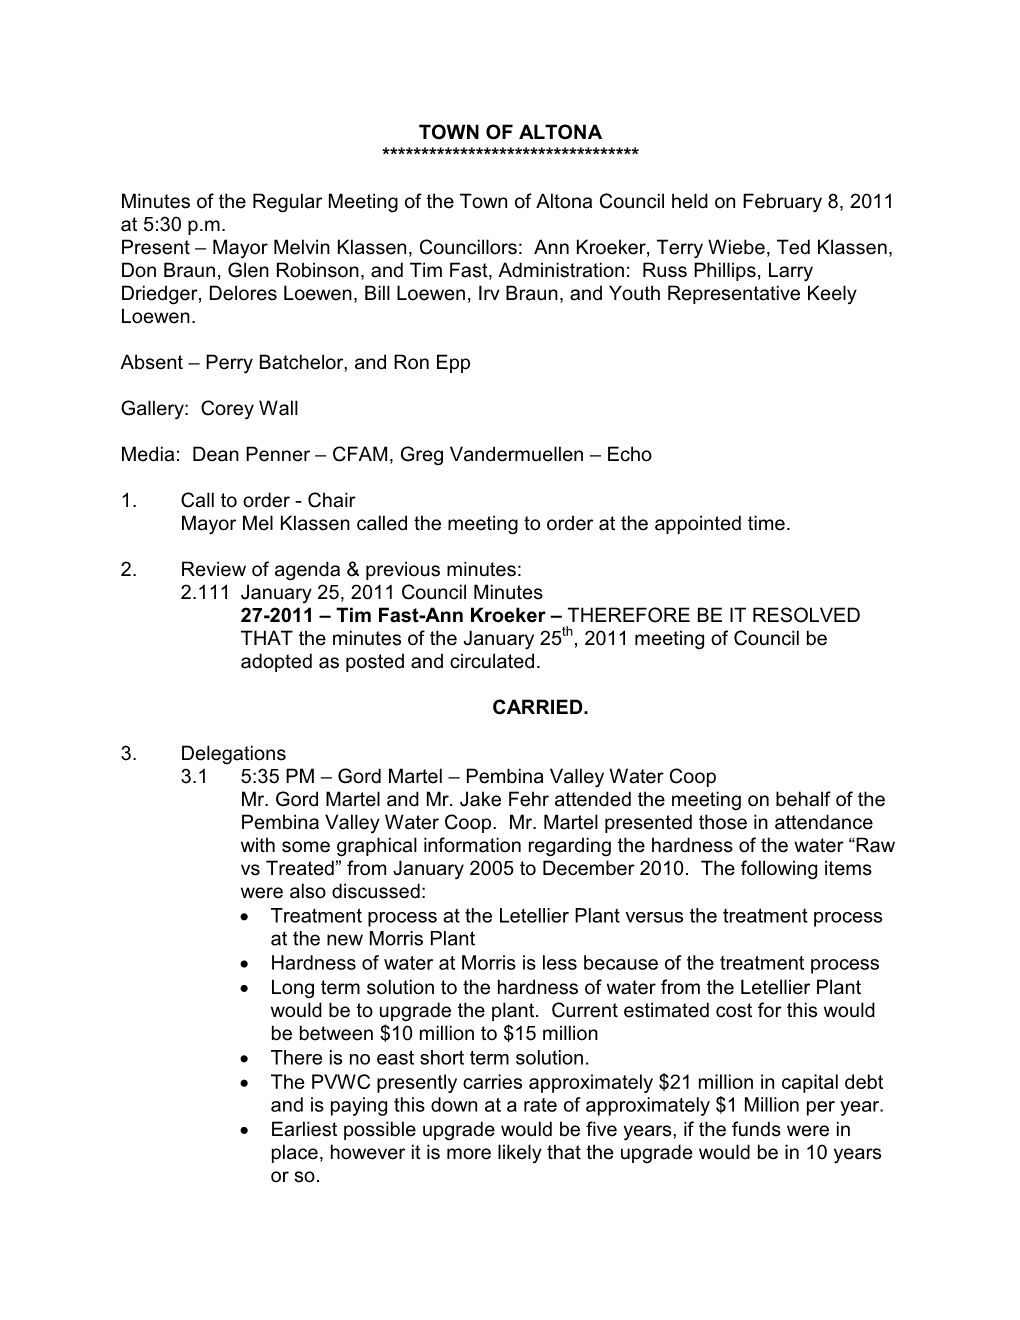 TOWN of ALTONA ********************************* Minutes of the Regular Meeting of the Town of Altona Council Held on February 8